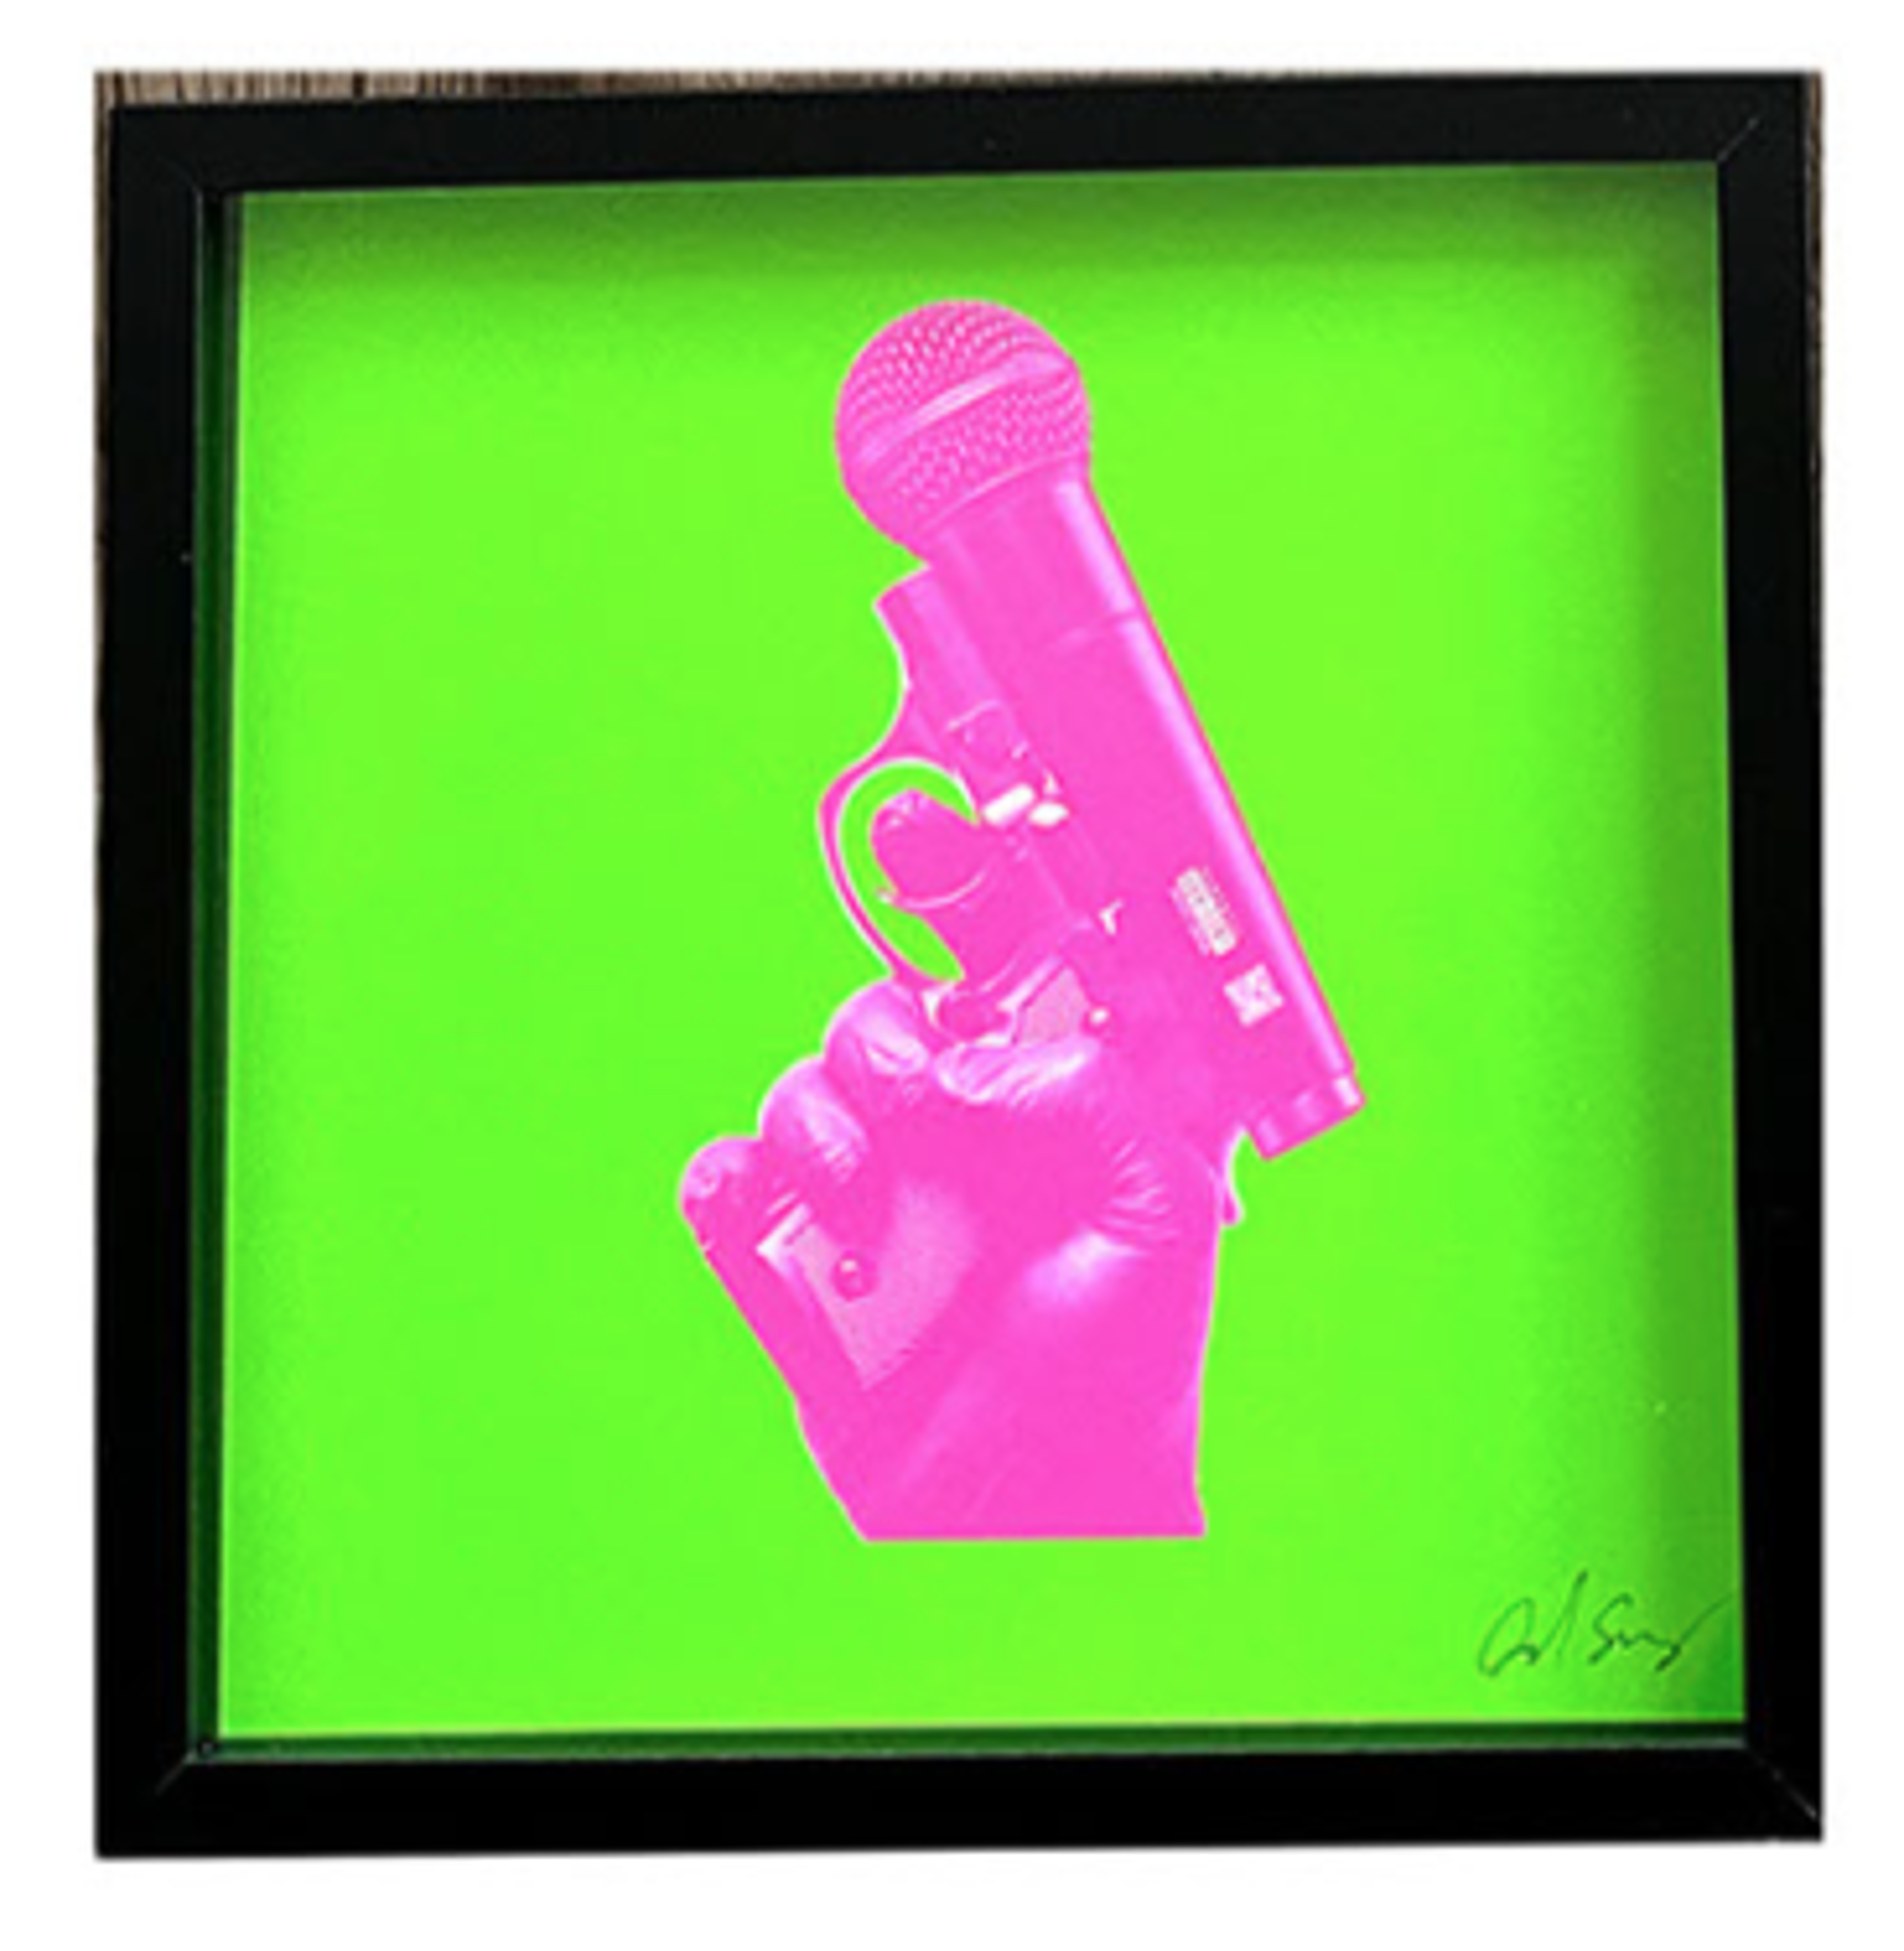 The Tongue is Mightier Than the Gun (green & pink) by David Schwartz